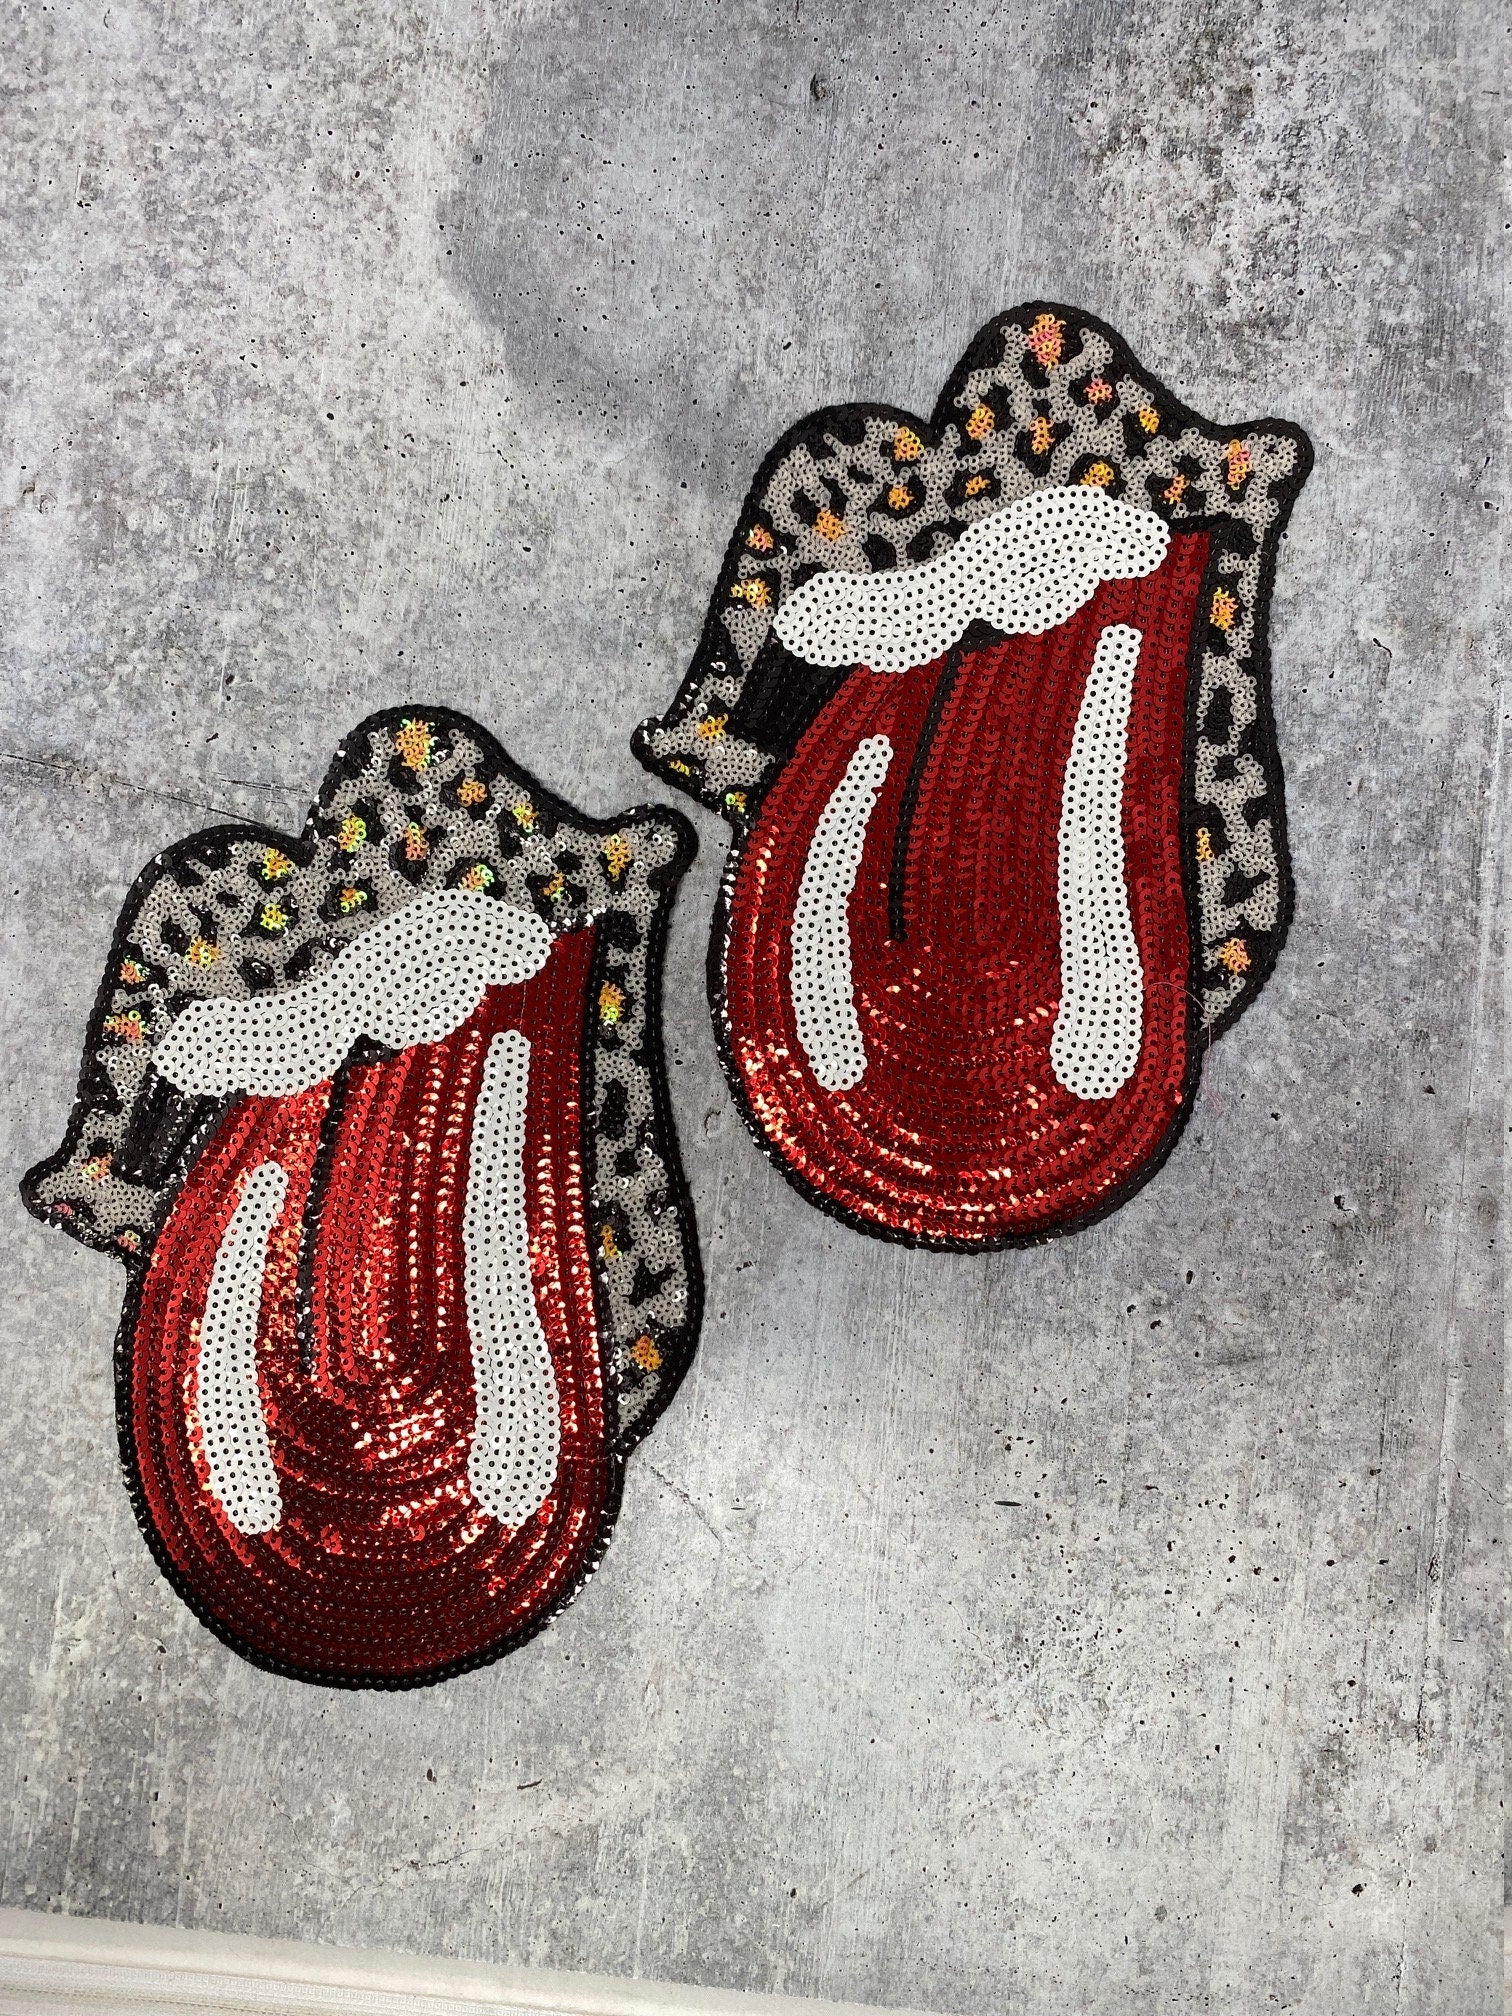 New, "Leopard" Sequins Lips and Tongue Patch (iron-on) Size 10", LARGE Bling Patch for Denim Jacket, Shirts, Hoodies, and More